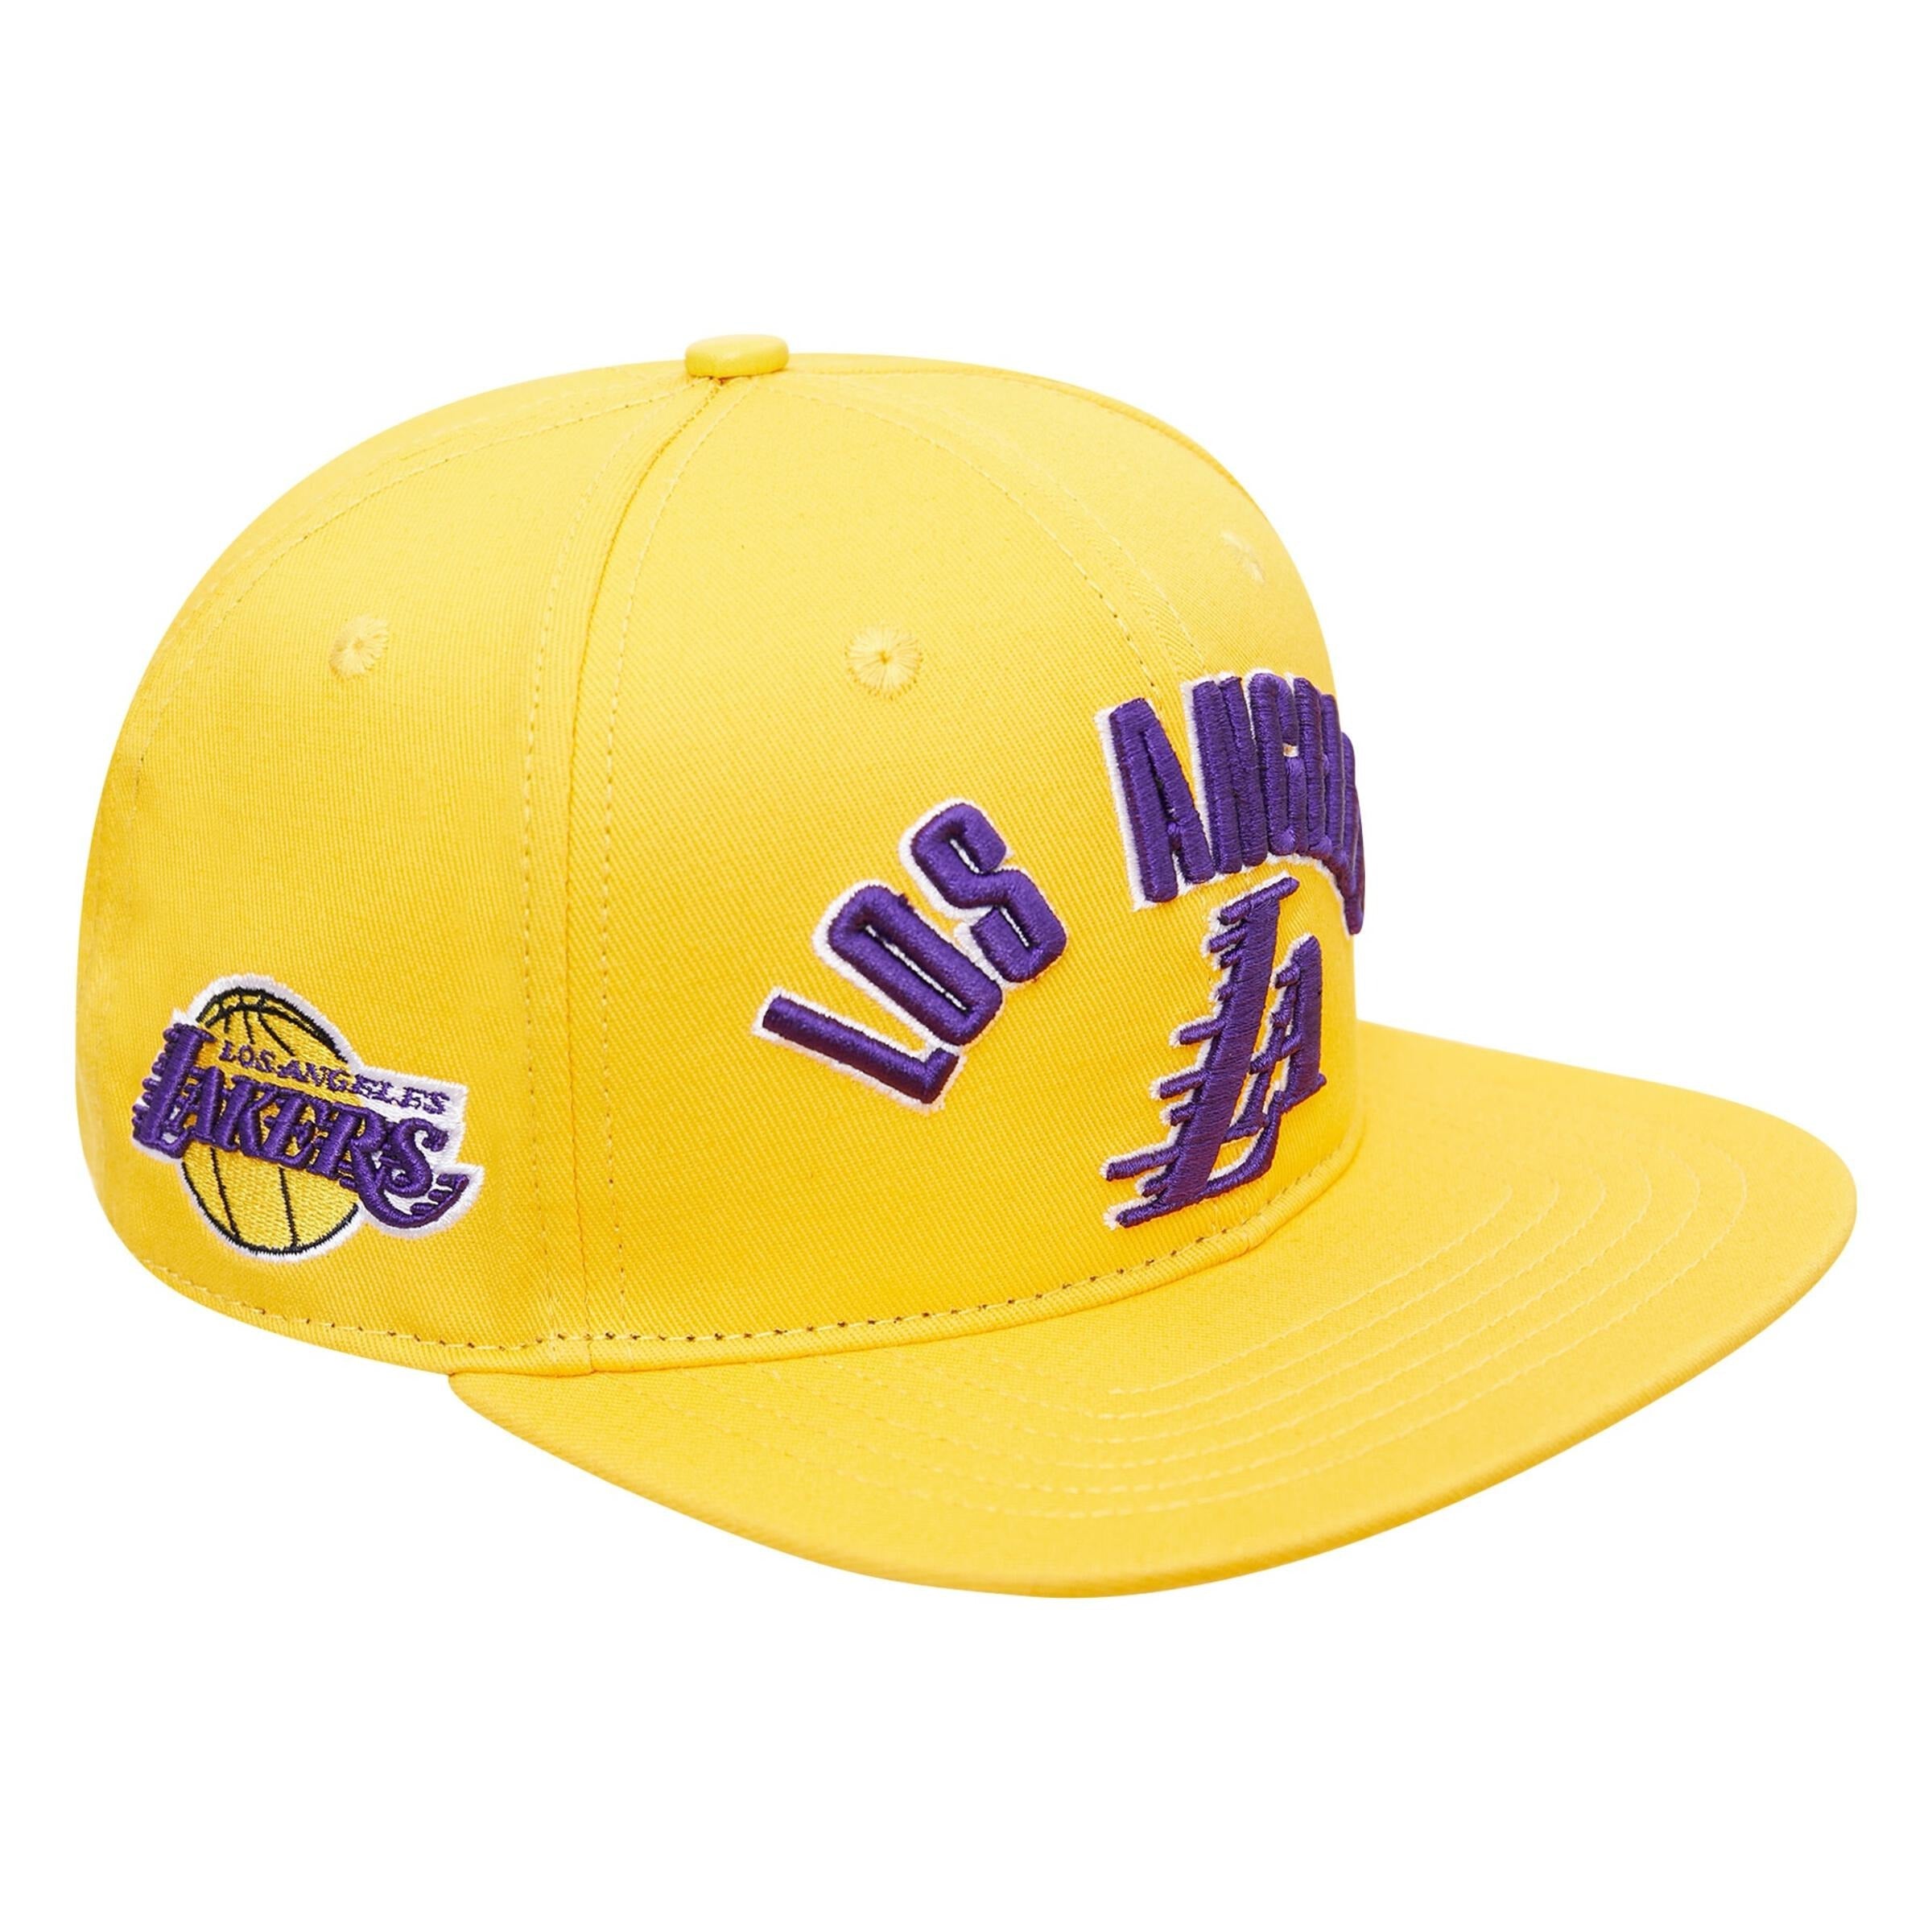 LOS ANGELES LAKERS STACKED LOGO WOOL SNAPBACK HAT (YELLOW) – Pro Standard